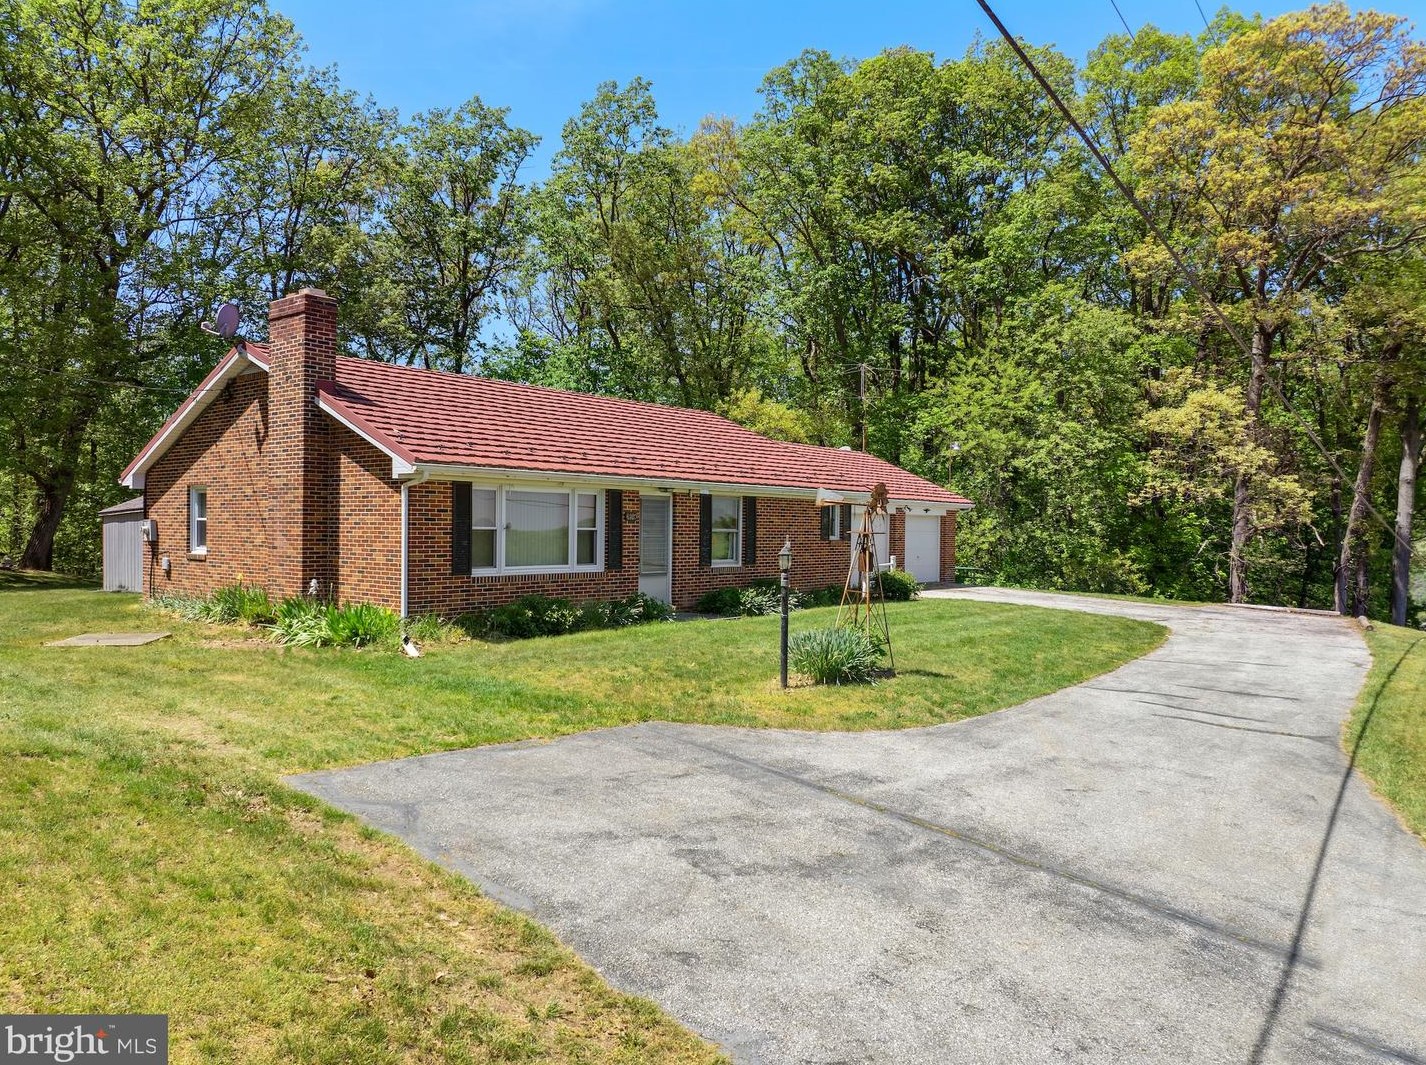 4720 Grand Valley Rd, Westminster, MD 21158